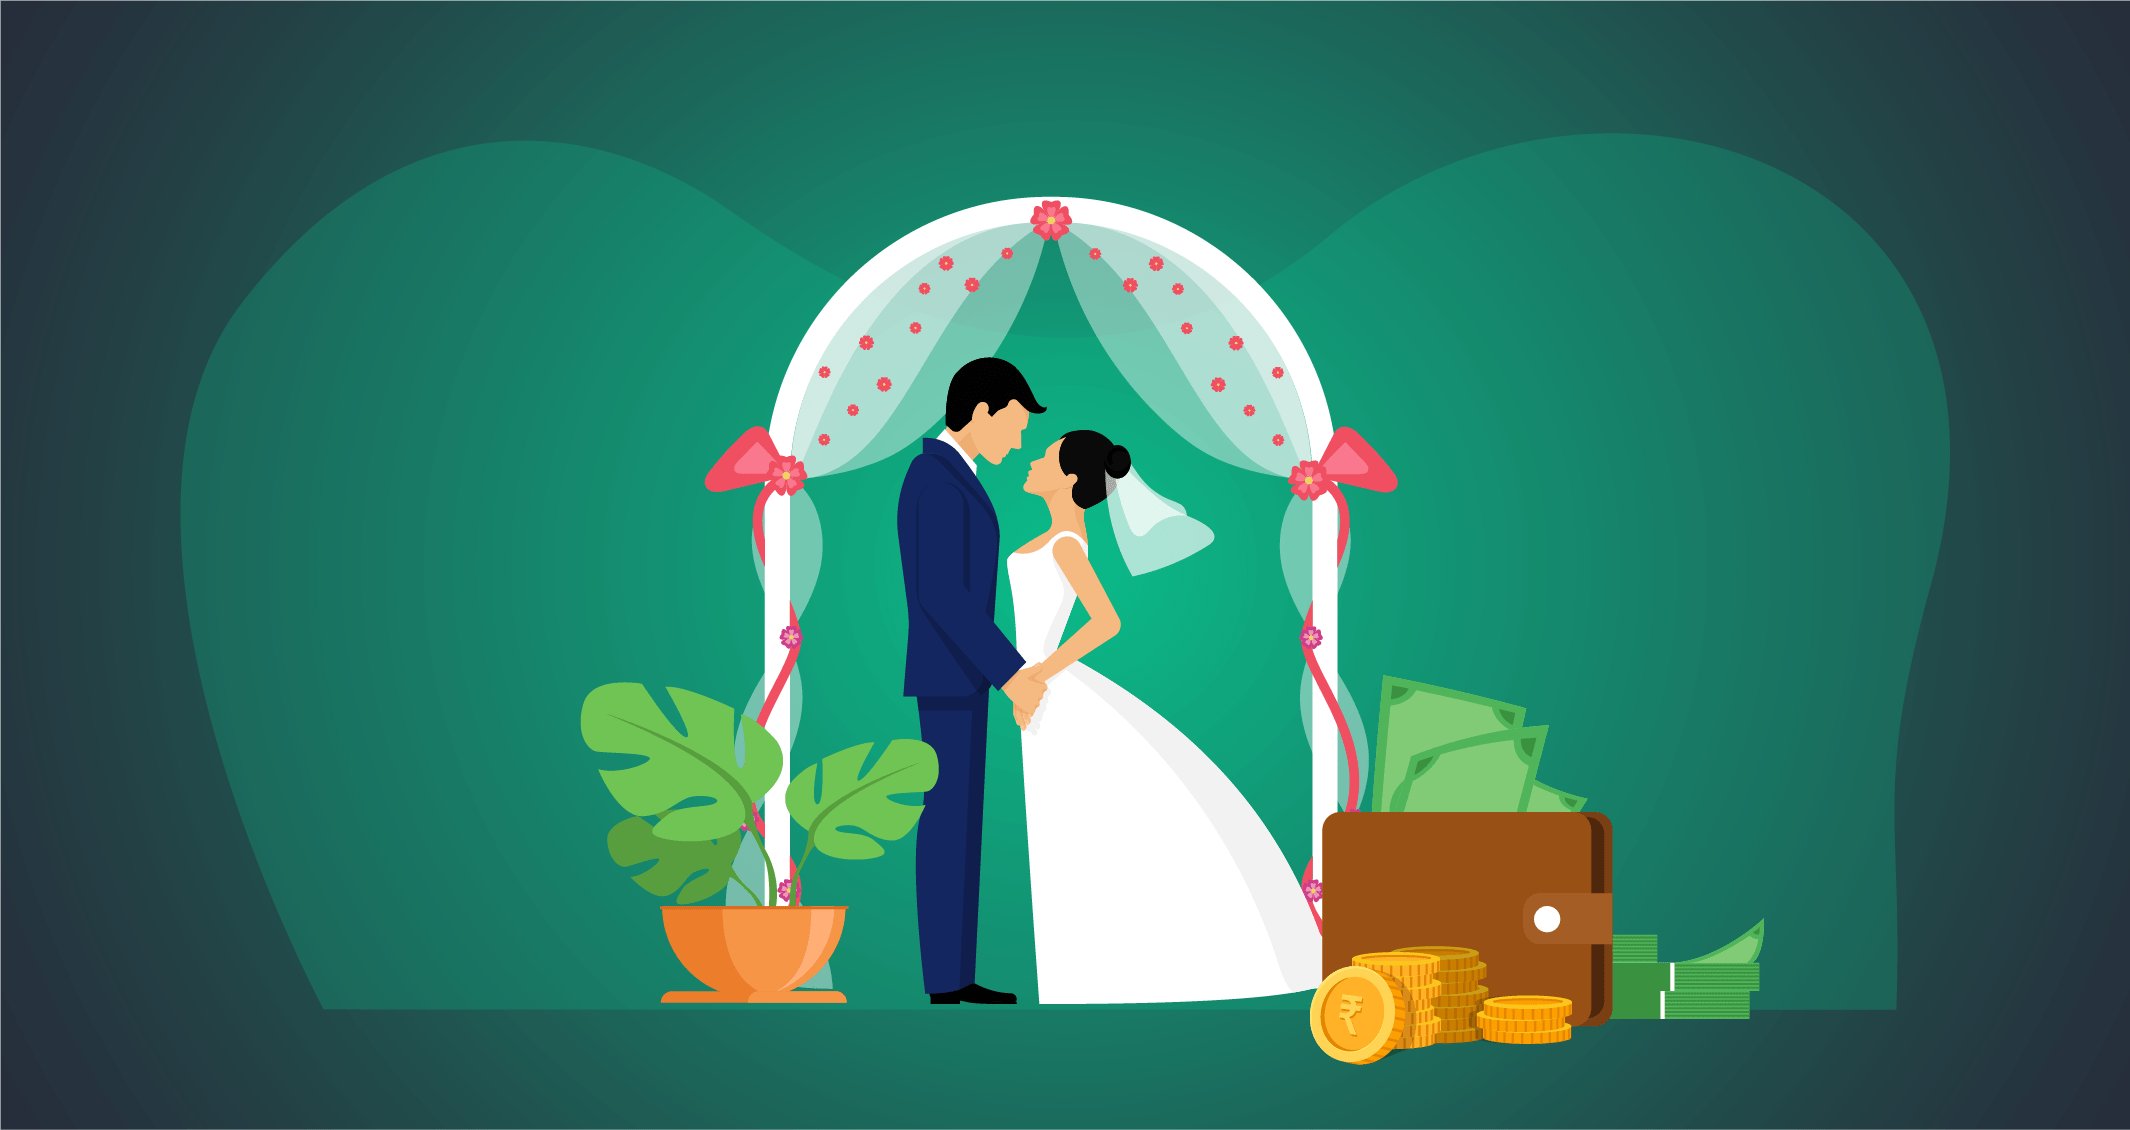 Pay for Your Own Wedding